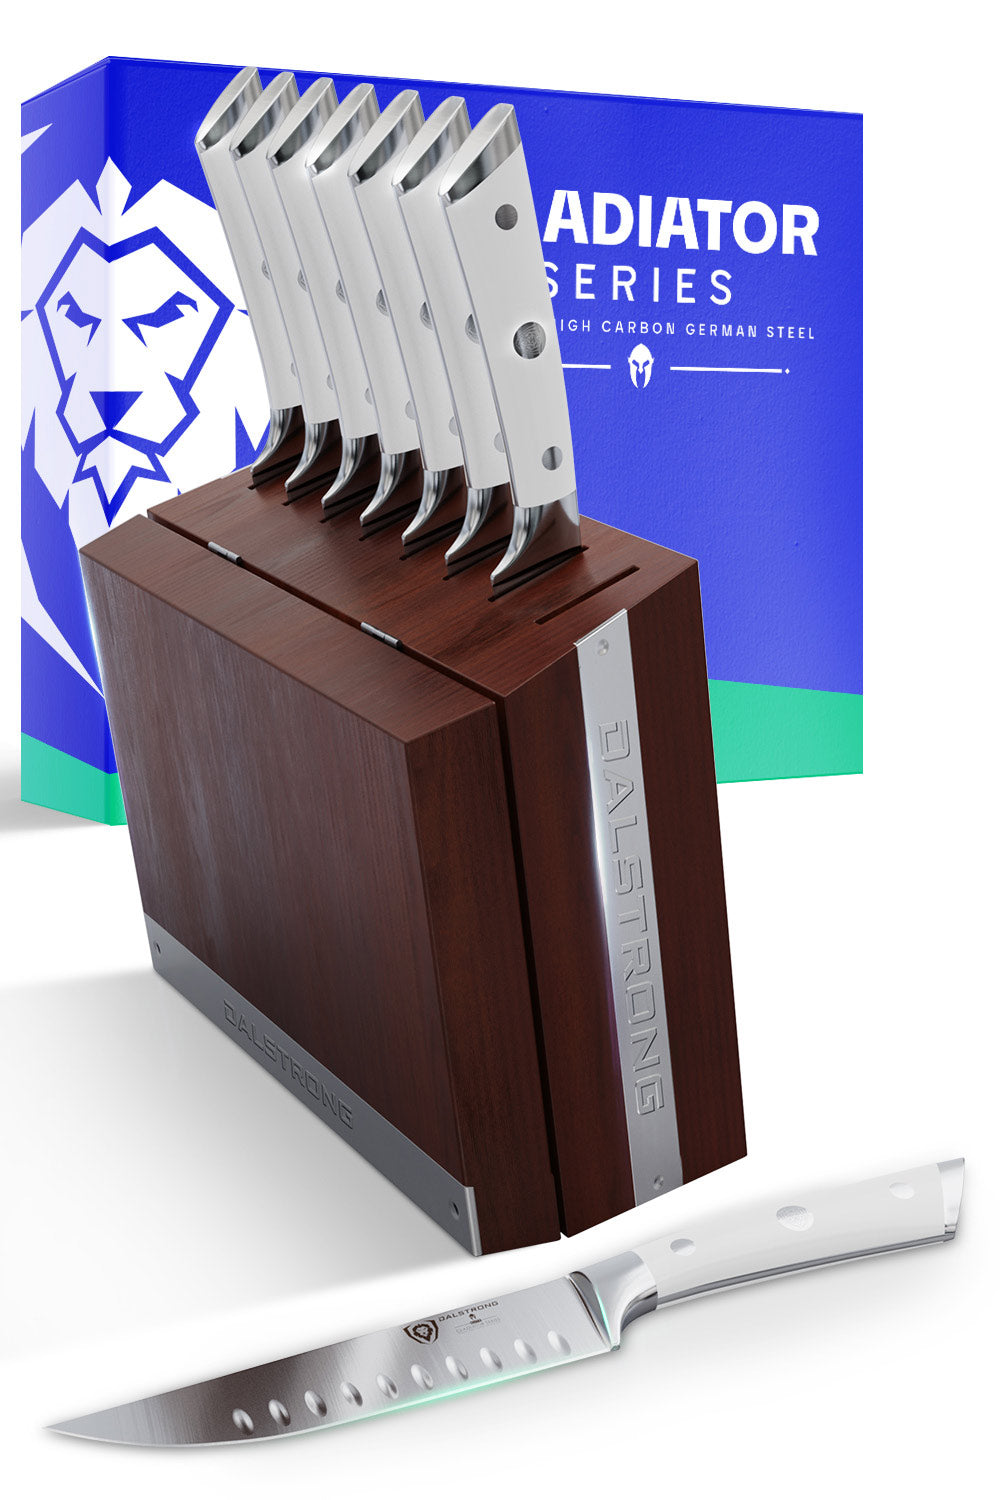 Dalstrong gladiator 8 piece steak knife set with white handles and block in front of it's premium packaging.